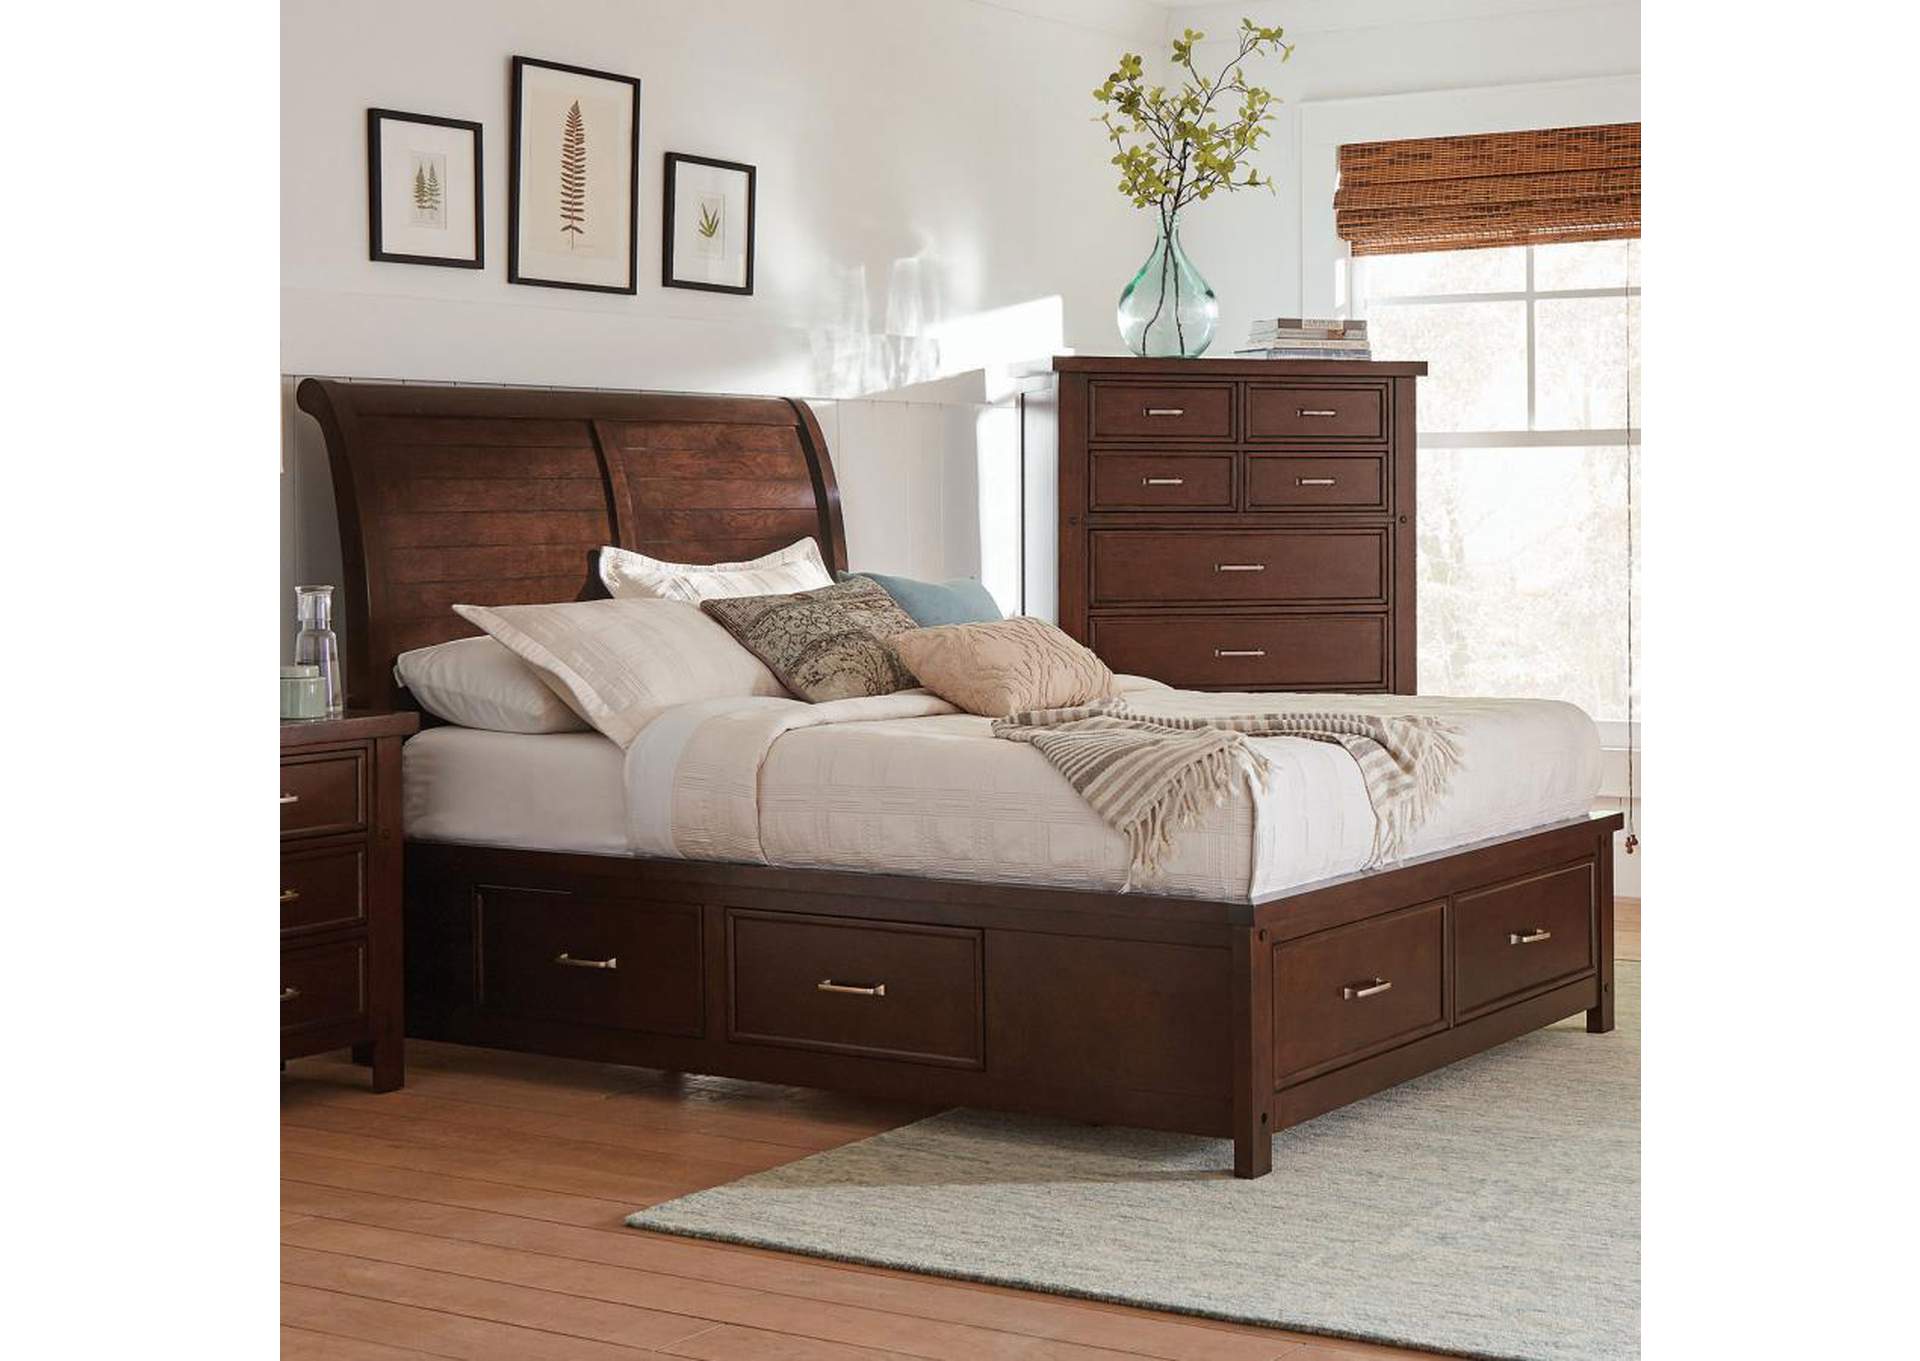 Barstow Queen Storage Bed Pinot Noir,Coaster Furniture